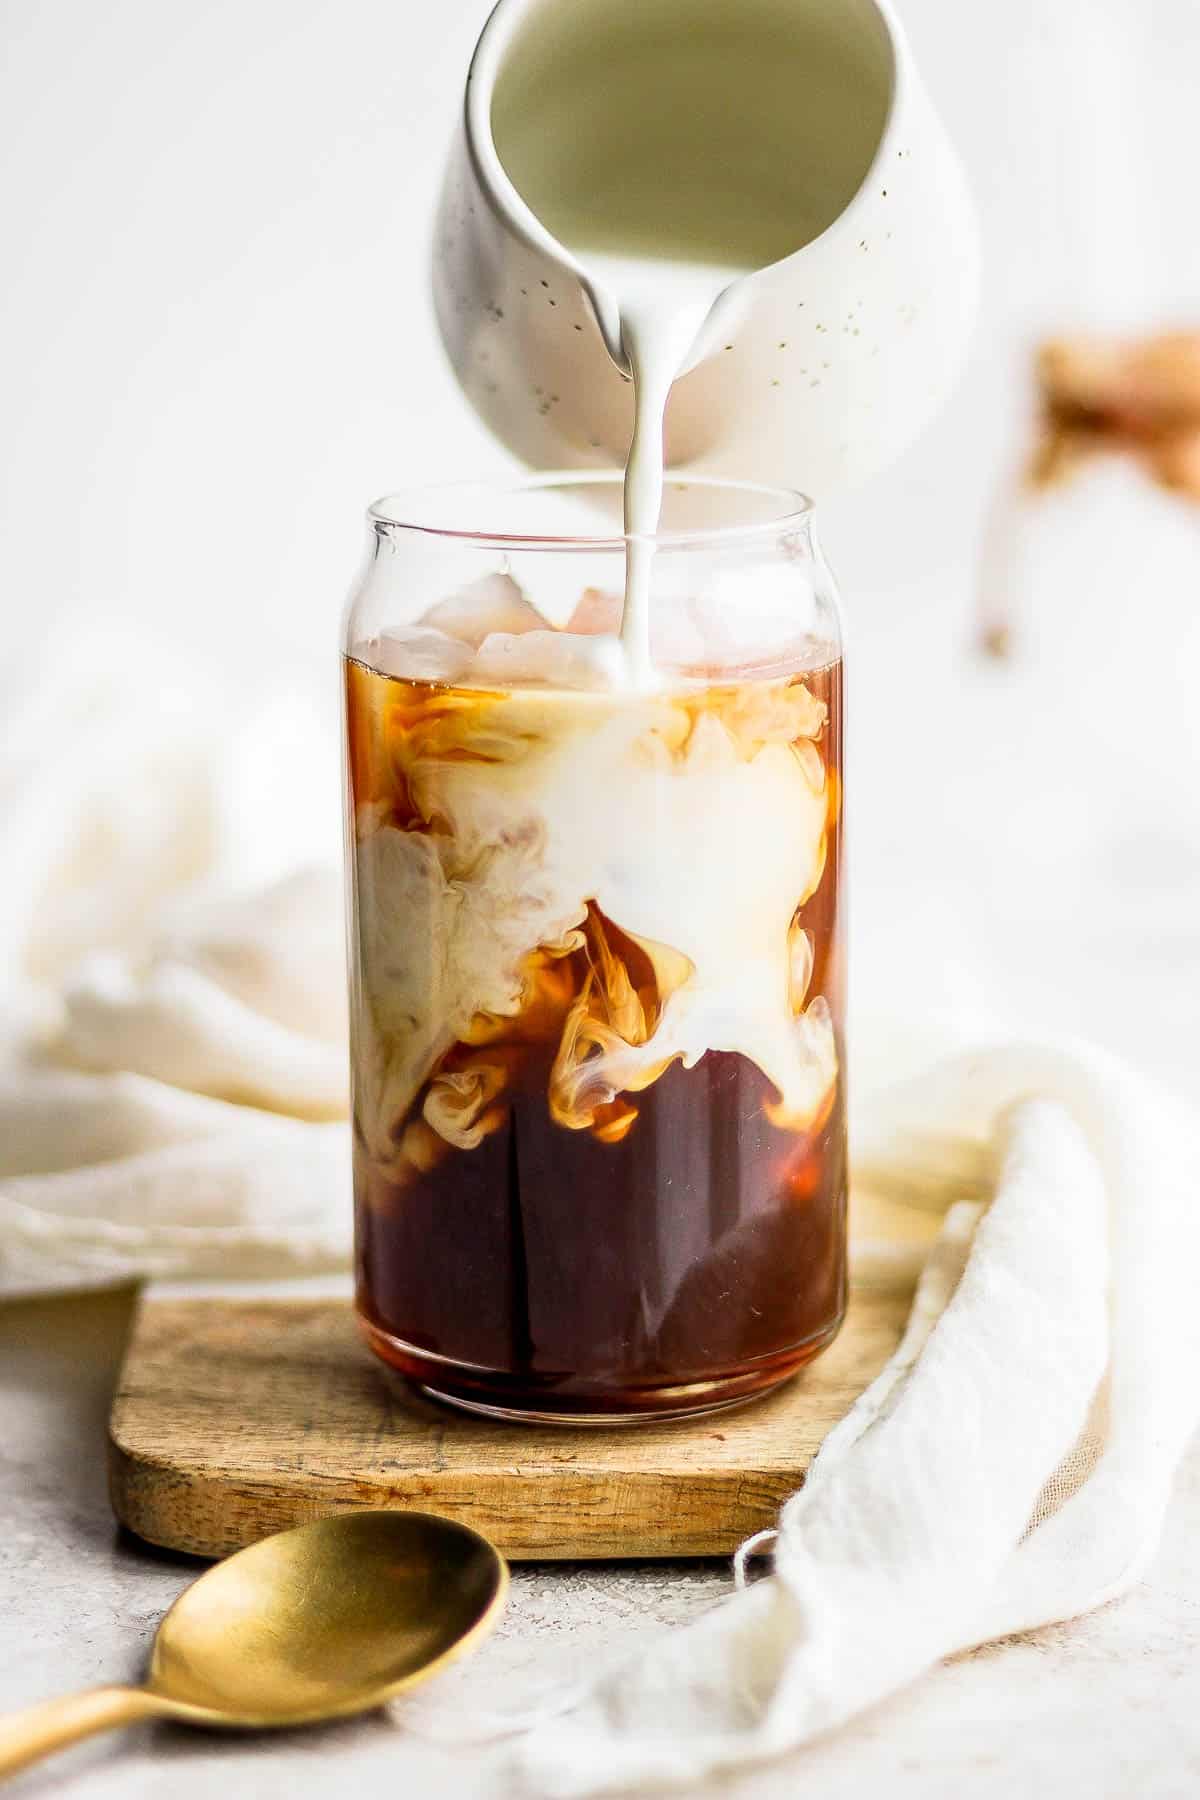 Creamer being poured into a glass of iced coffee.